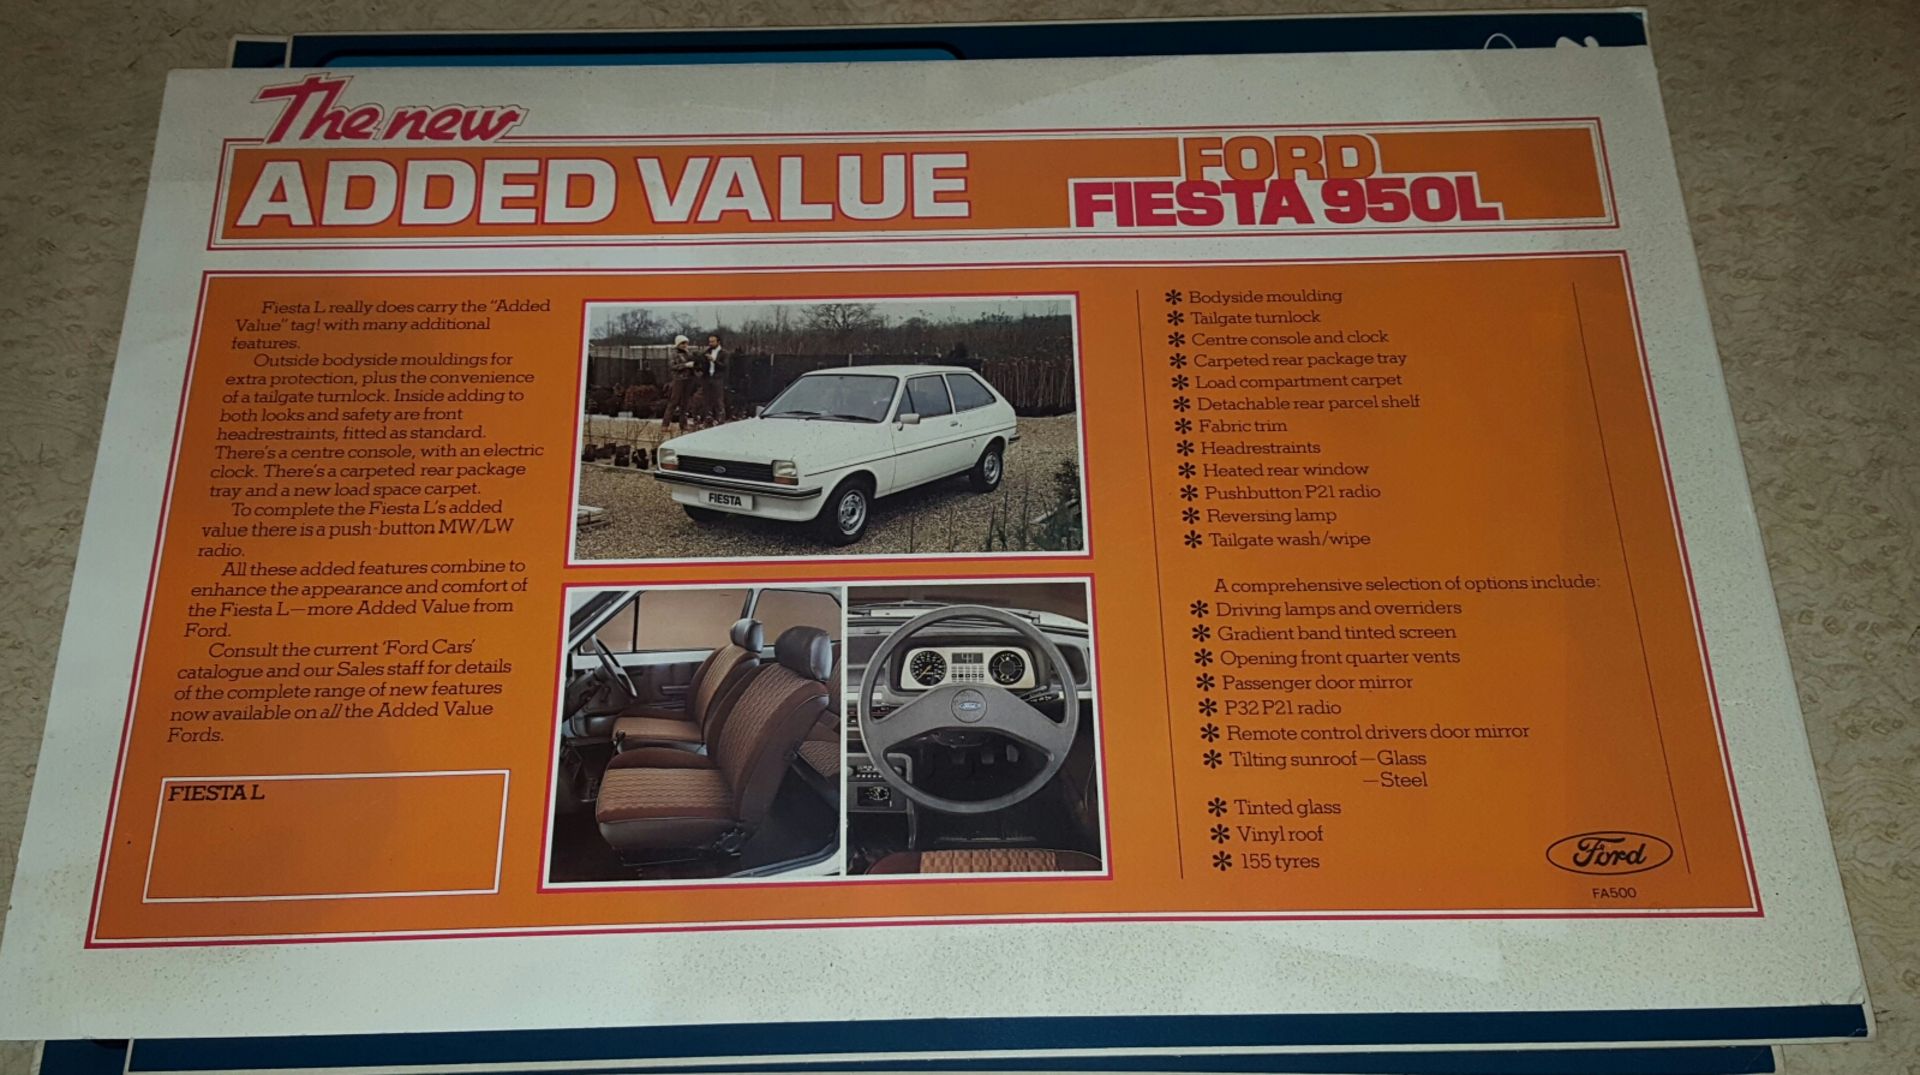 3 x Vintage Retro 1970's Ford Motor Car Advertising Display Cards From a Motor Dealership - Image 3 of 3